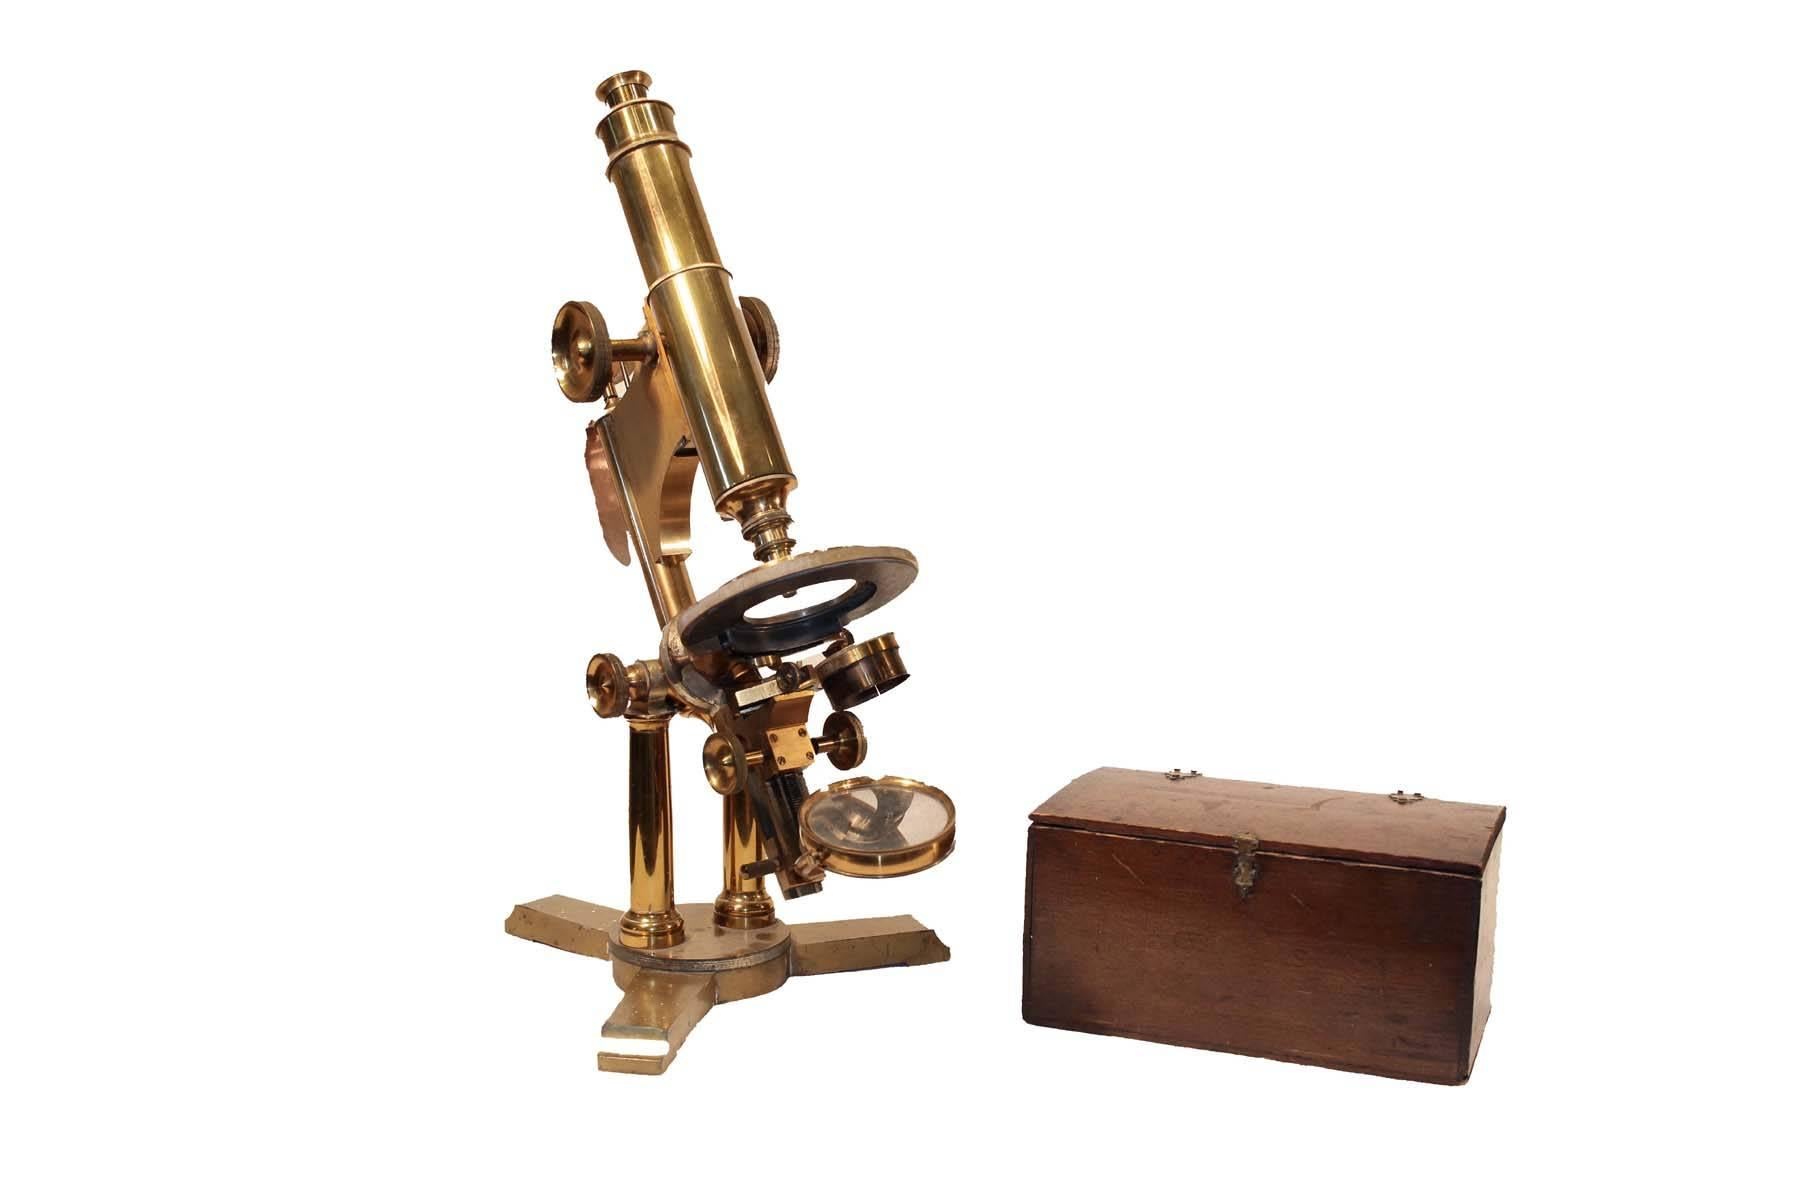 Bausch & Lomb microscope with original box of lenses. Nine extra sets of lenses are in brass containers in the original box, This solid brass microscope is in amazing condition considering age. Optics are all in working order as is all adjusting